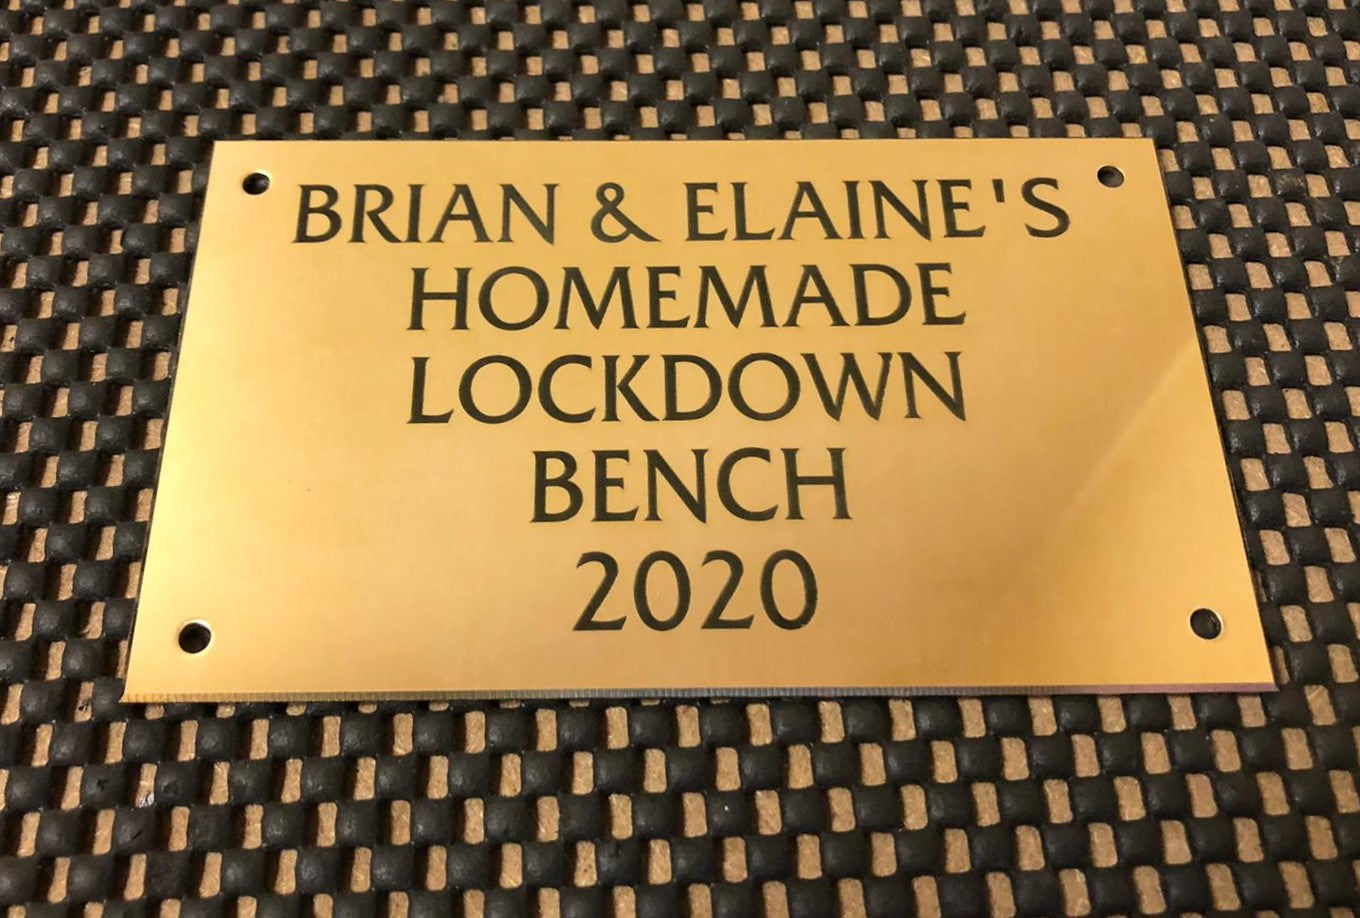 Personalised Engraved Polished Brass Plaques - NO MOUNTING HOLES - EIGHTEEN Size Options